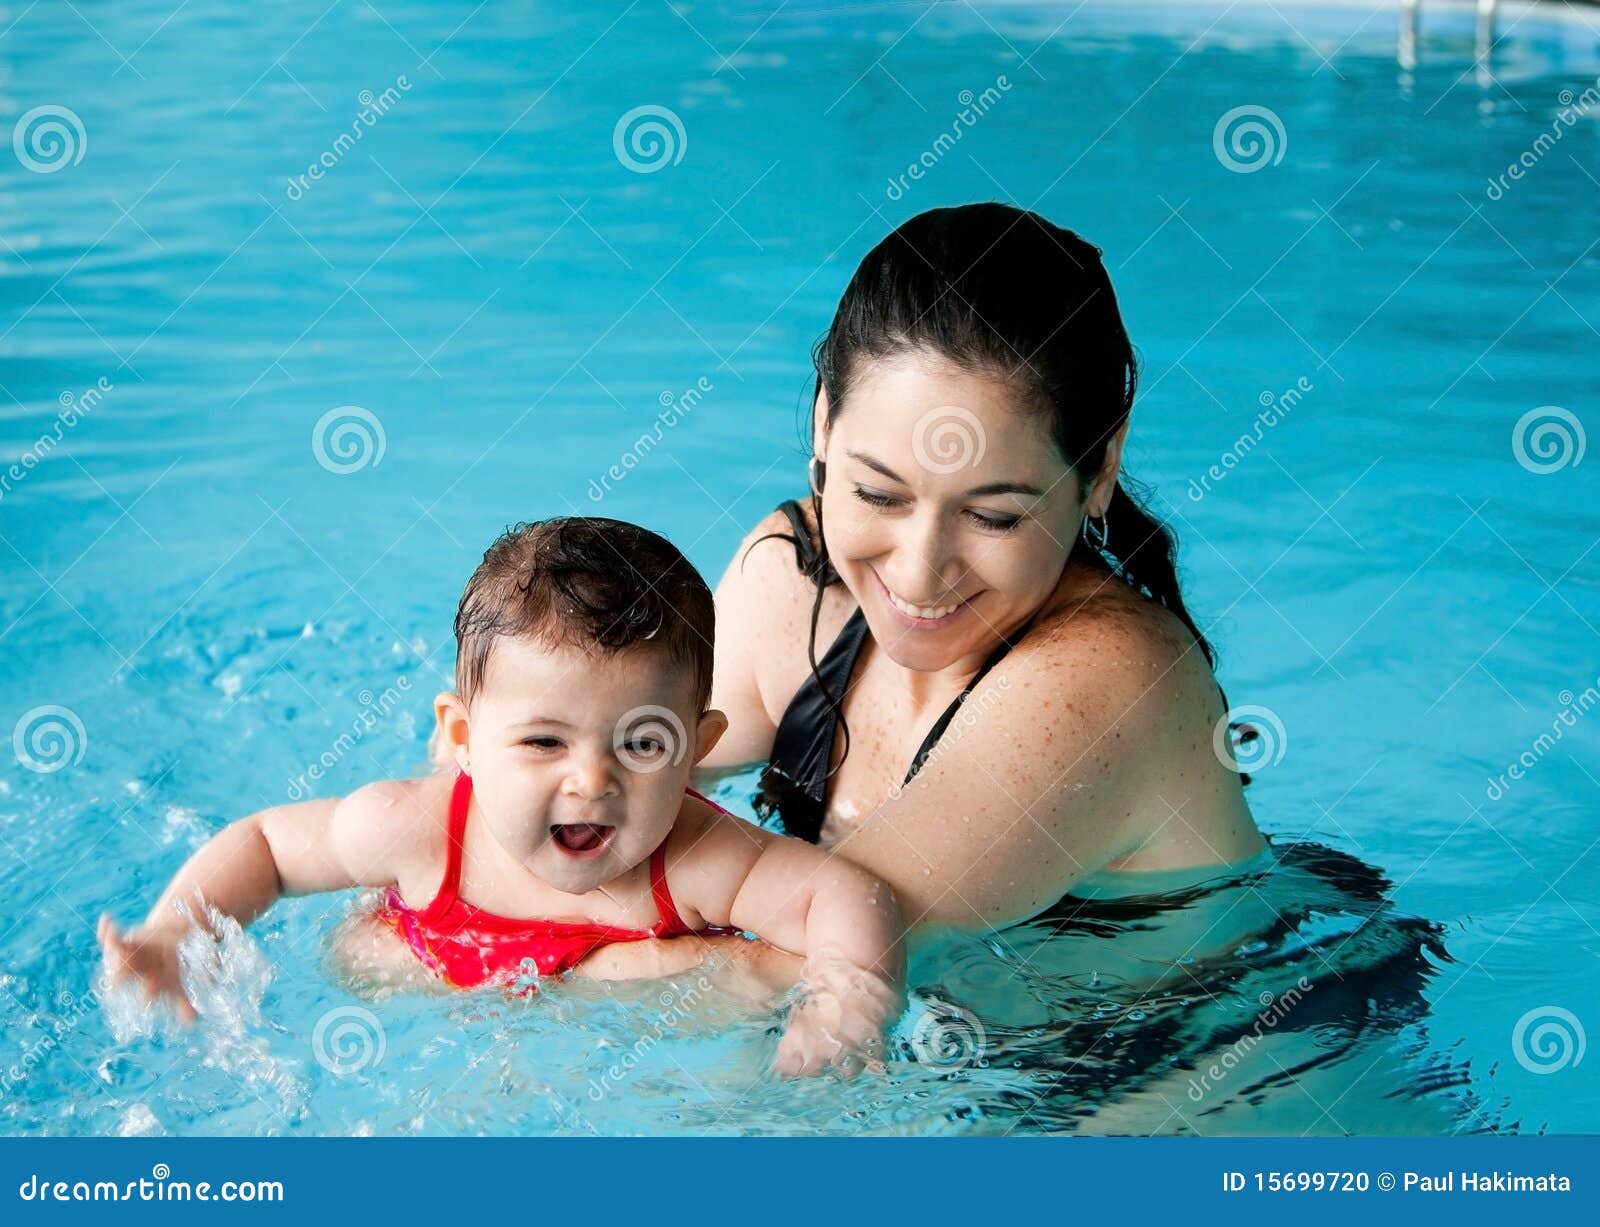 mother teaching baby swimming